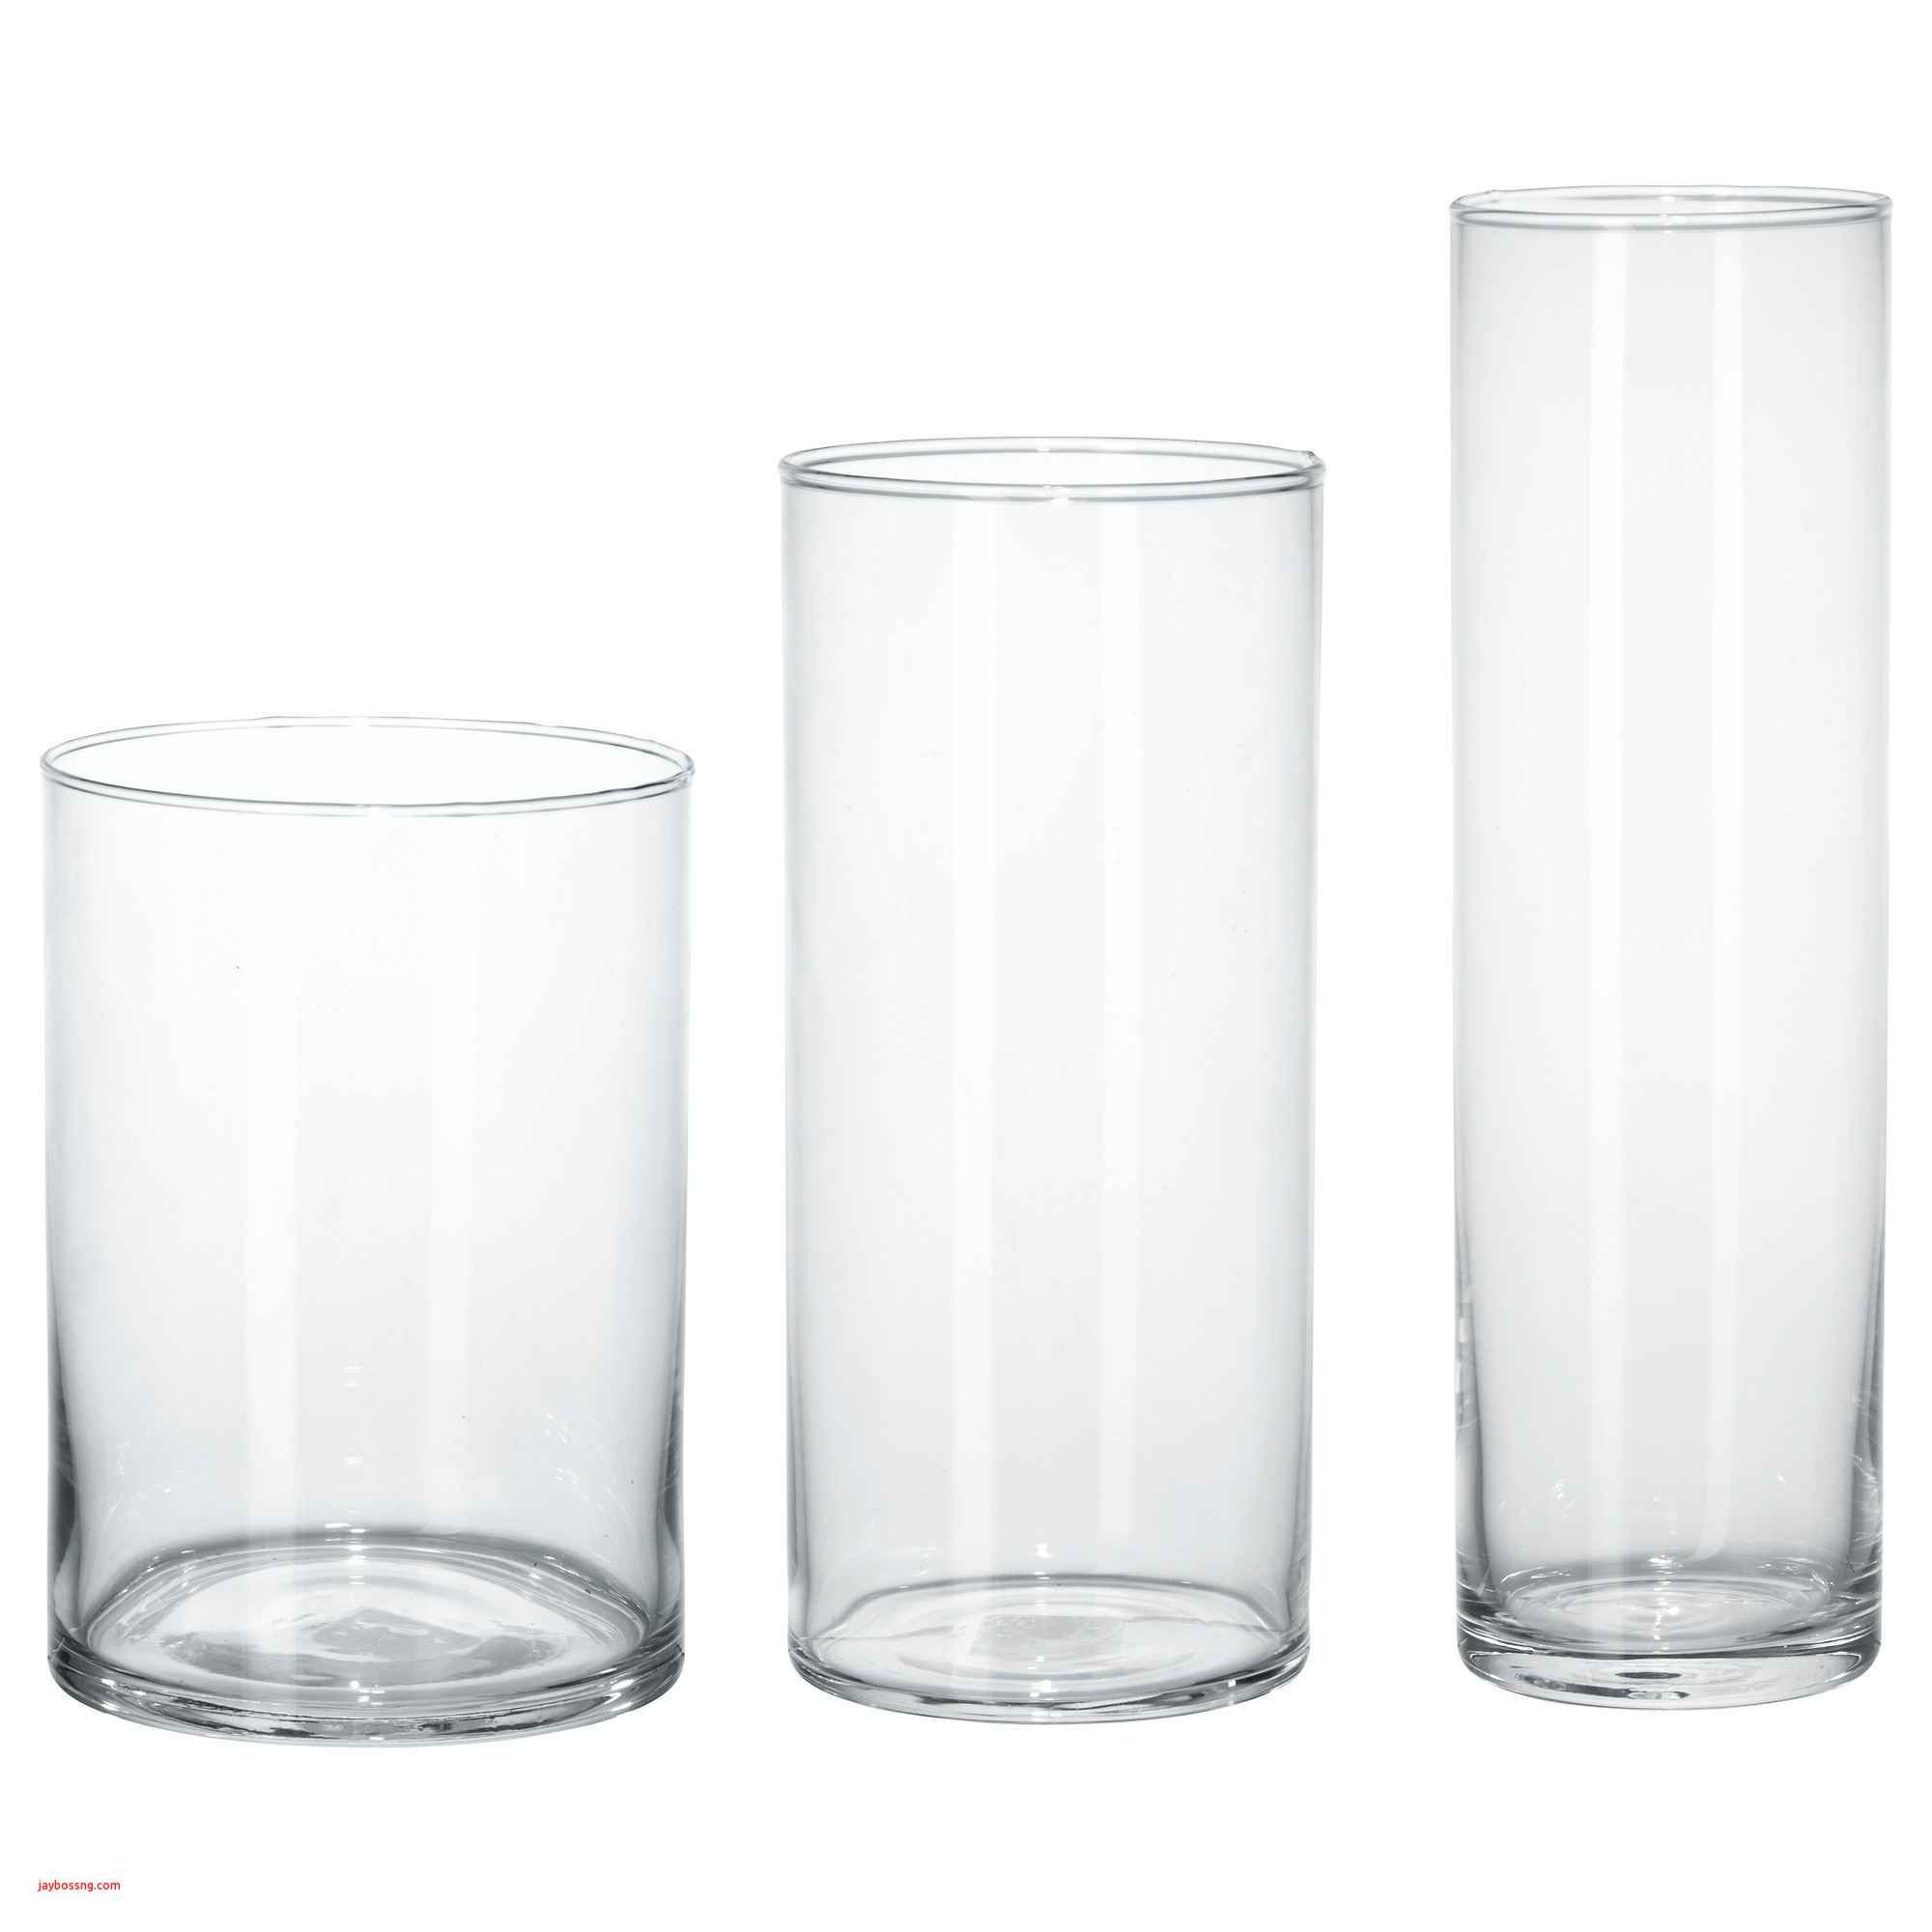 21 attractive Large Plastic Vase 2024 free download large plastic vase of brown glass vase fresh ikea white table created pe s5h vases ikea throughout brown glass vase fresh ikea white table created pe s5h vases ikea vase i 0d bladet